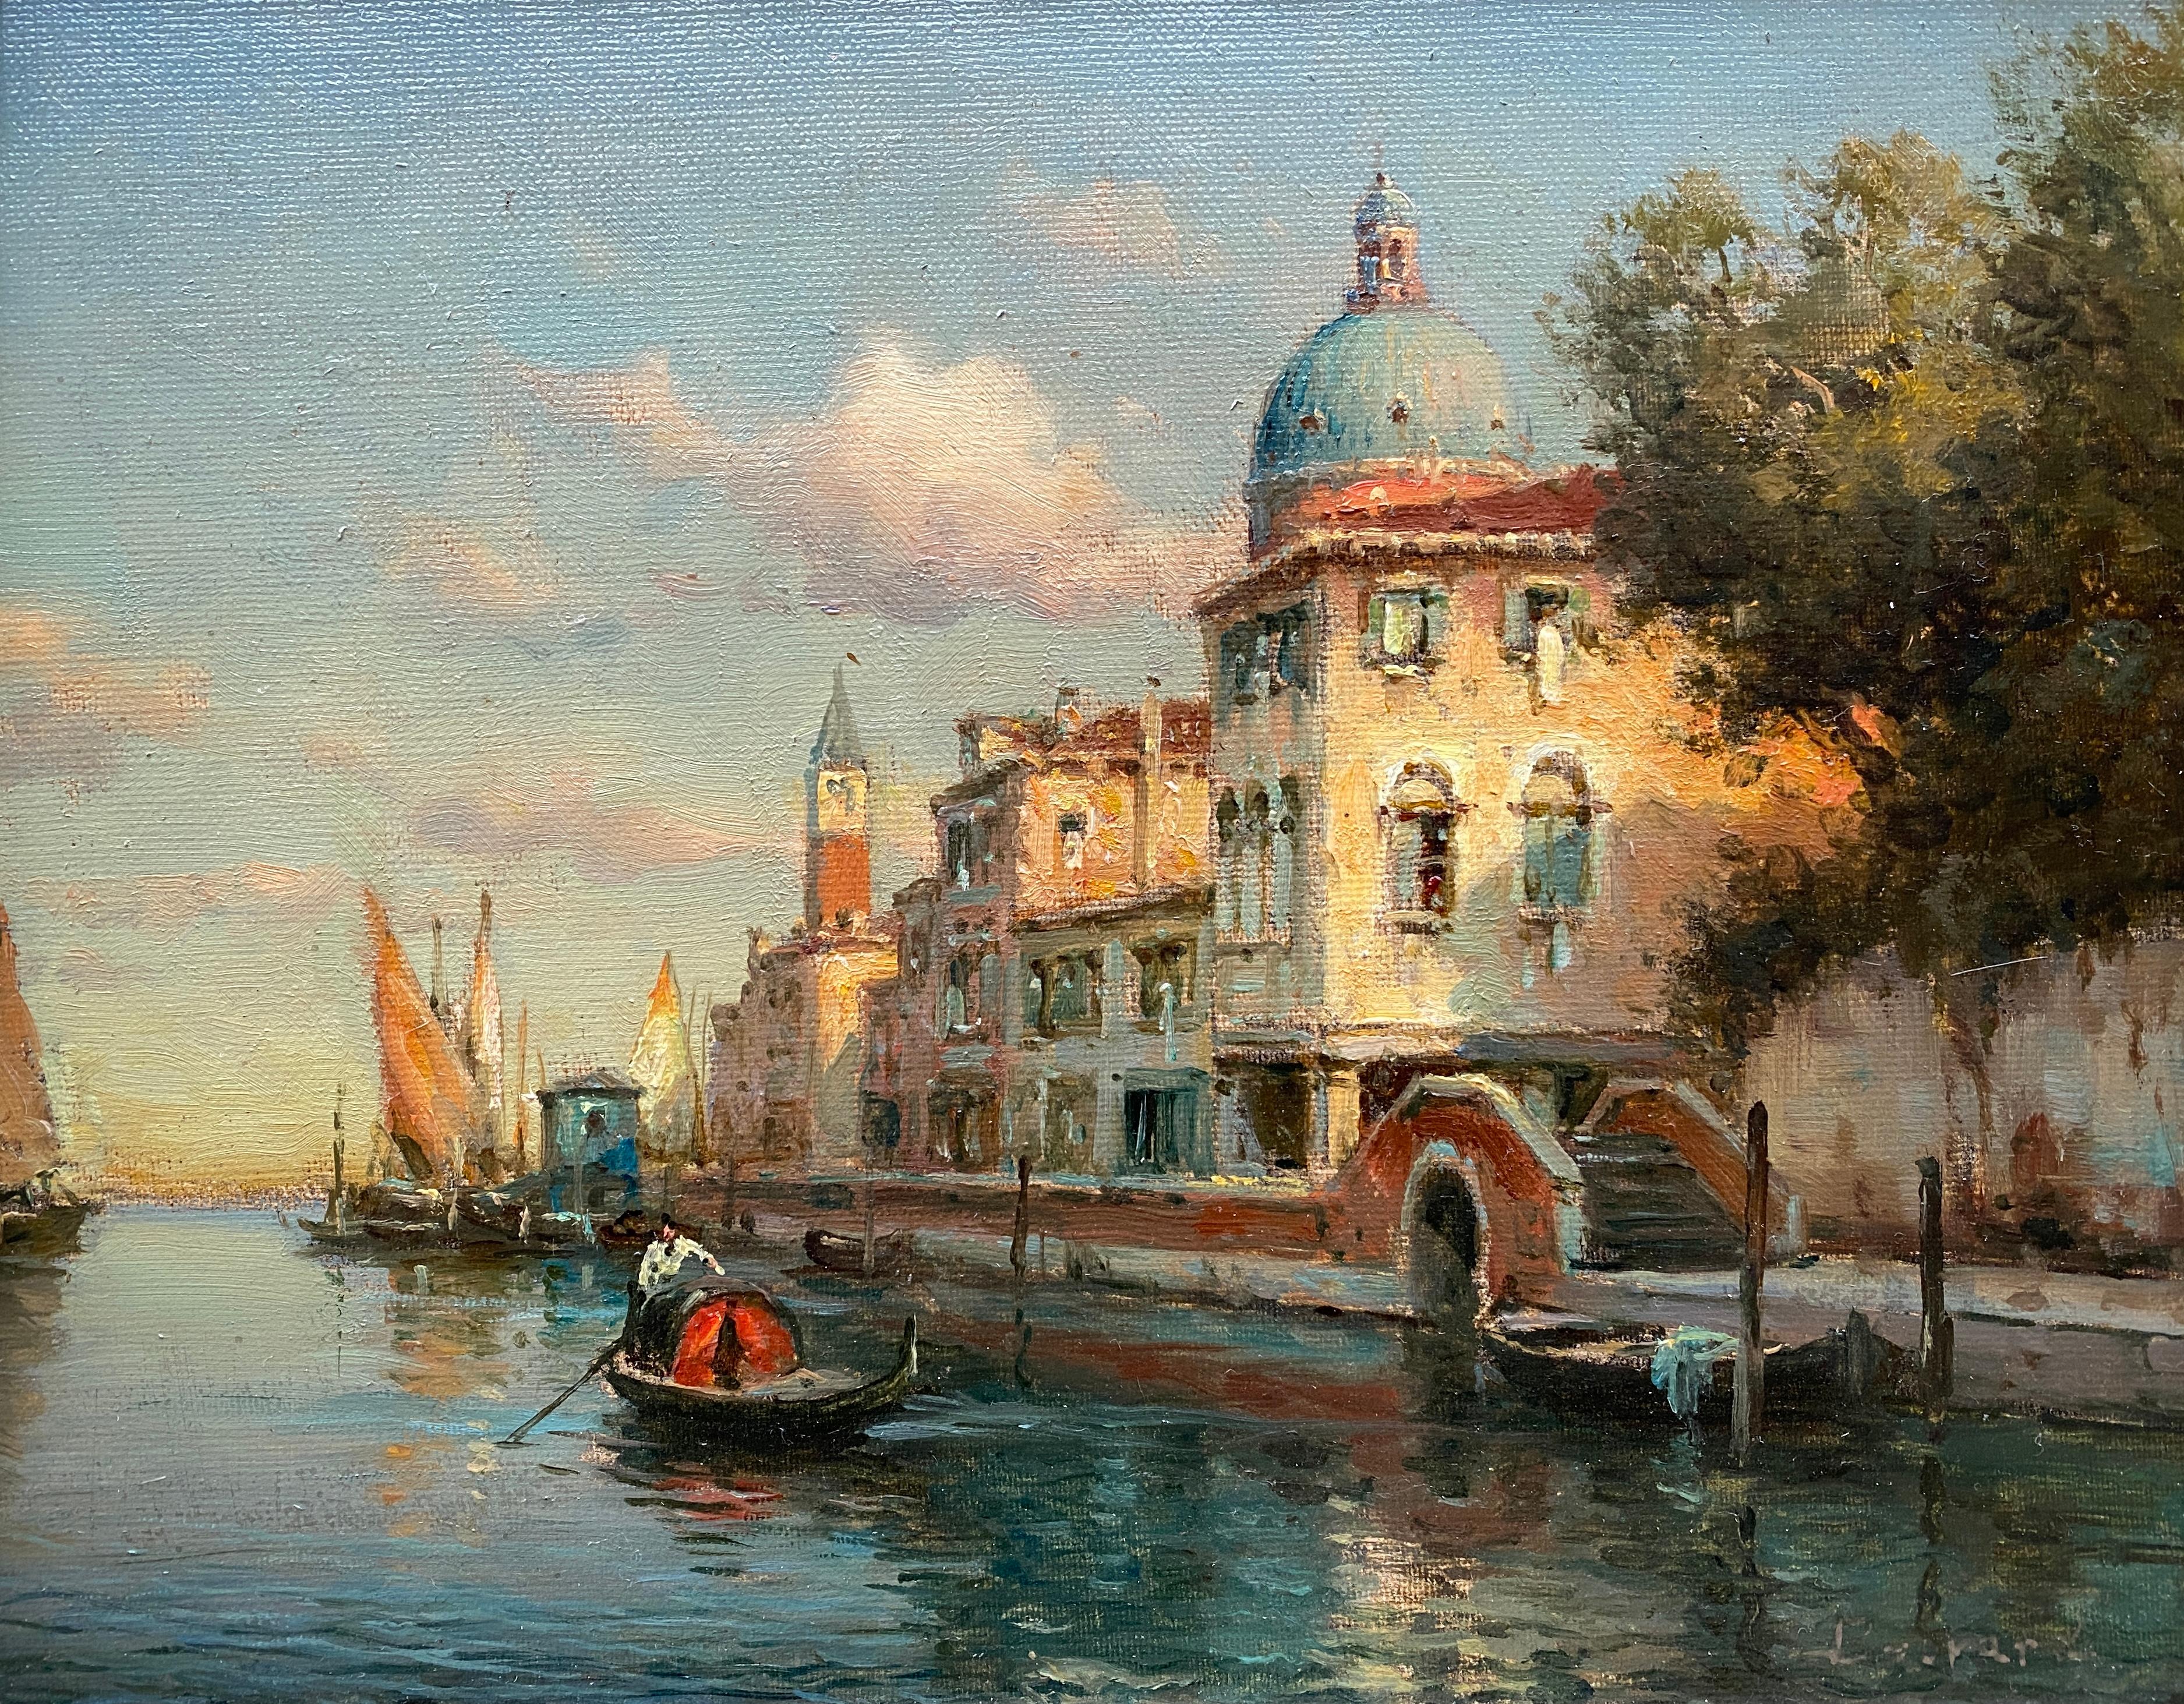 A View of Venice by Antoine Bouvard, Saint-Jean-de-Bournay 1870 – 1955, French - Painting by Bouvard Antoine snr.